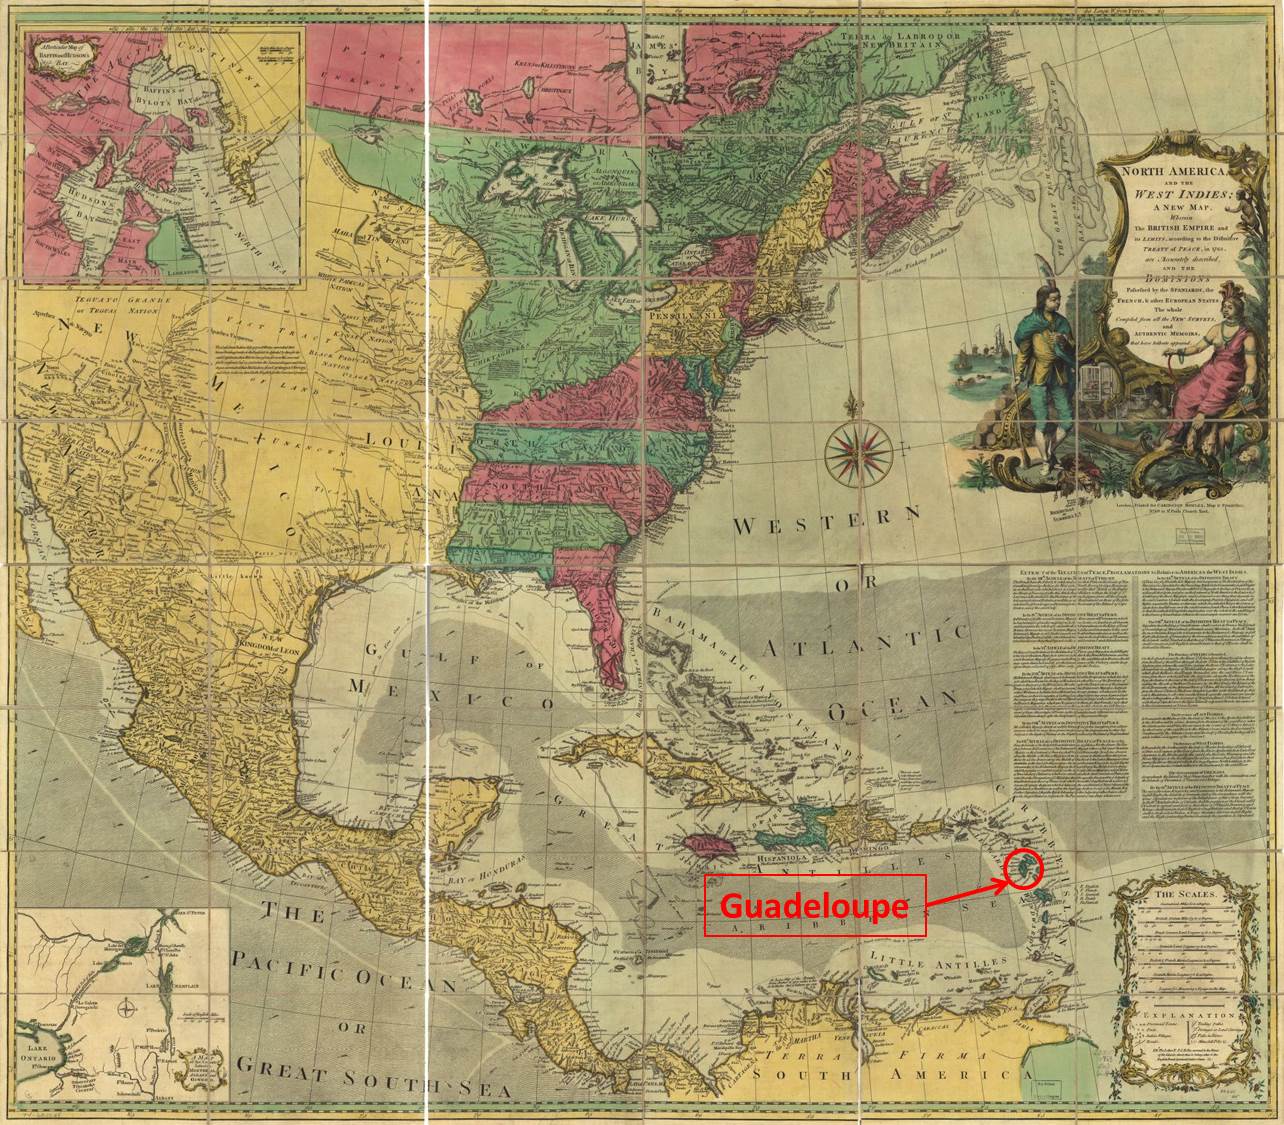 After losing the French and Indian War, France chose to trade all of Canada and Louisiana for the small island of Guadeloupe.